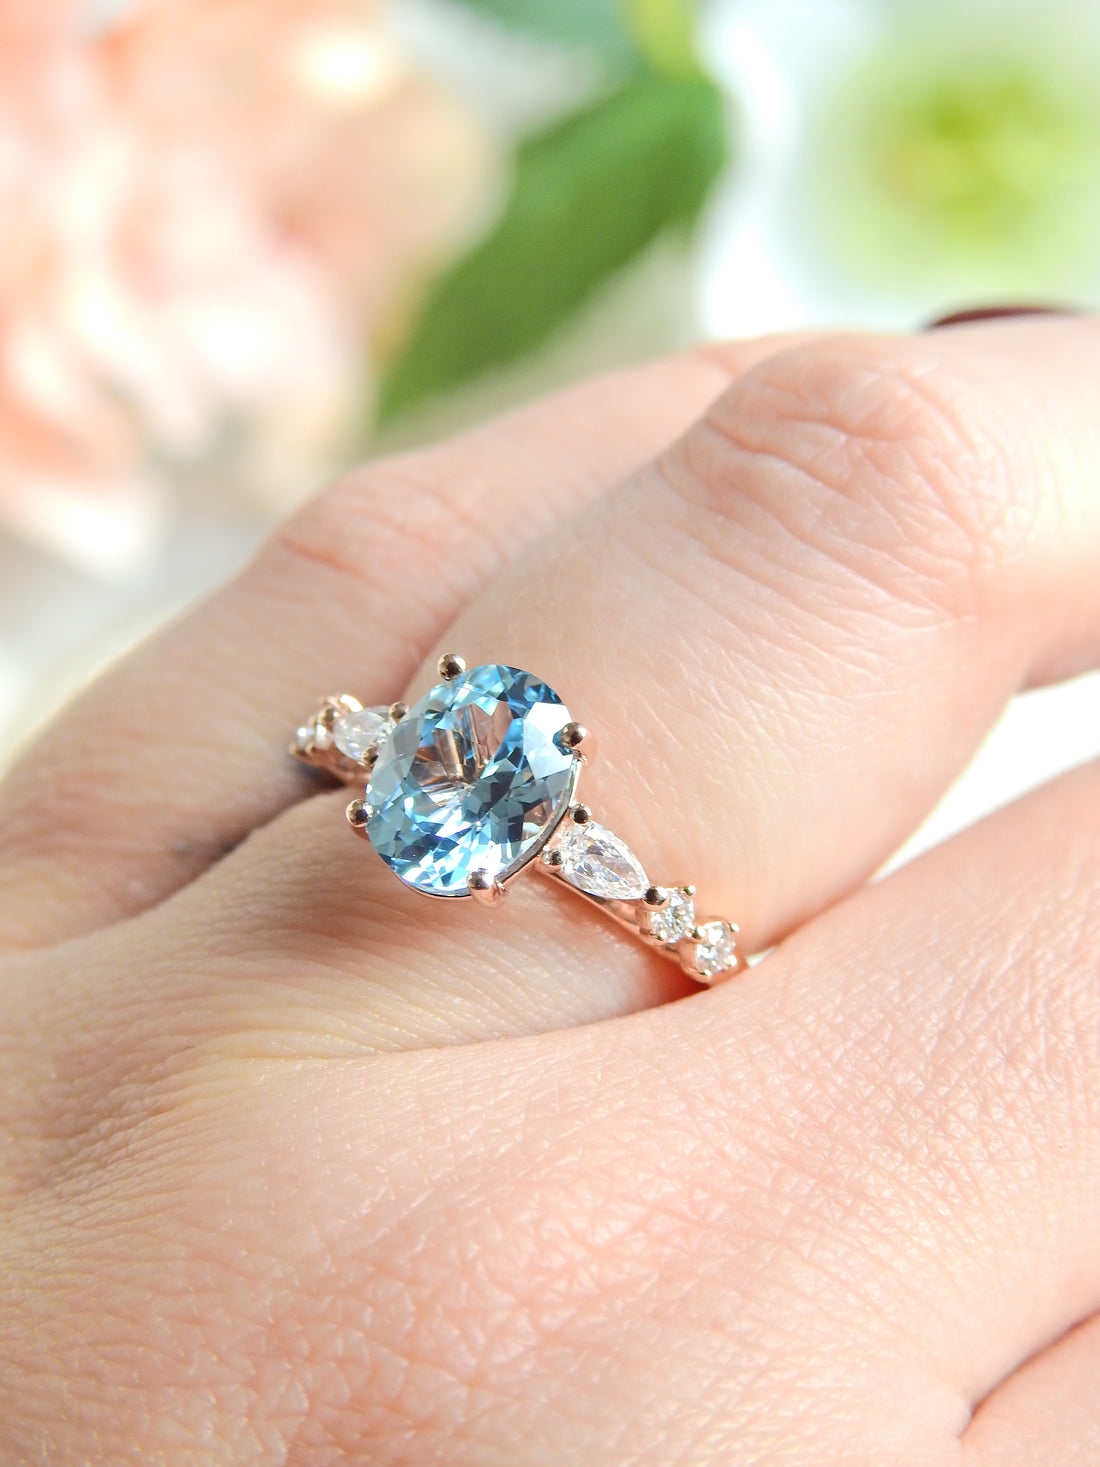 How To Clean and Care For An Aquamarine Stone